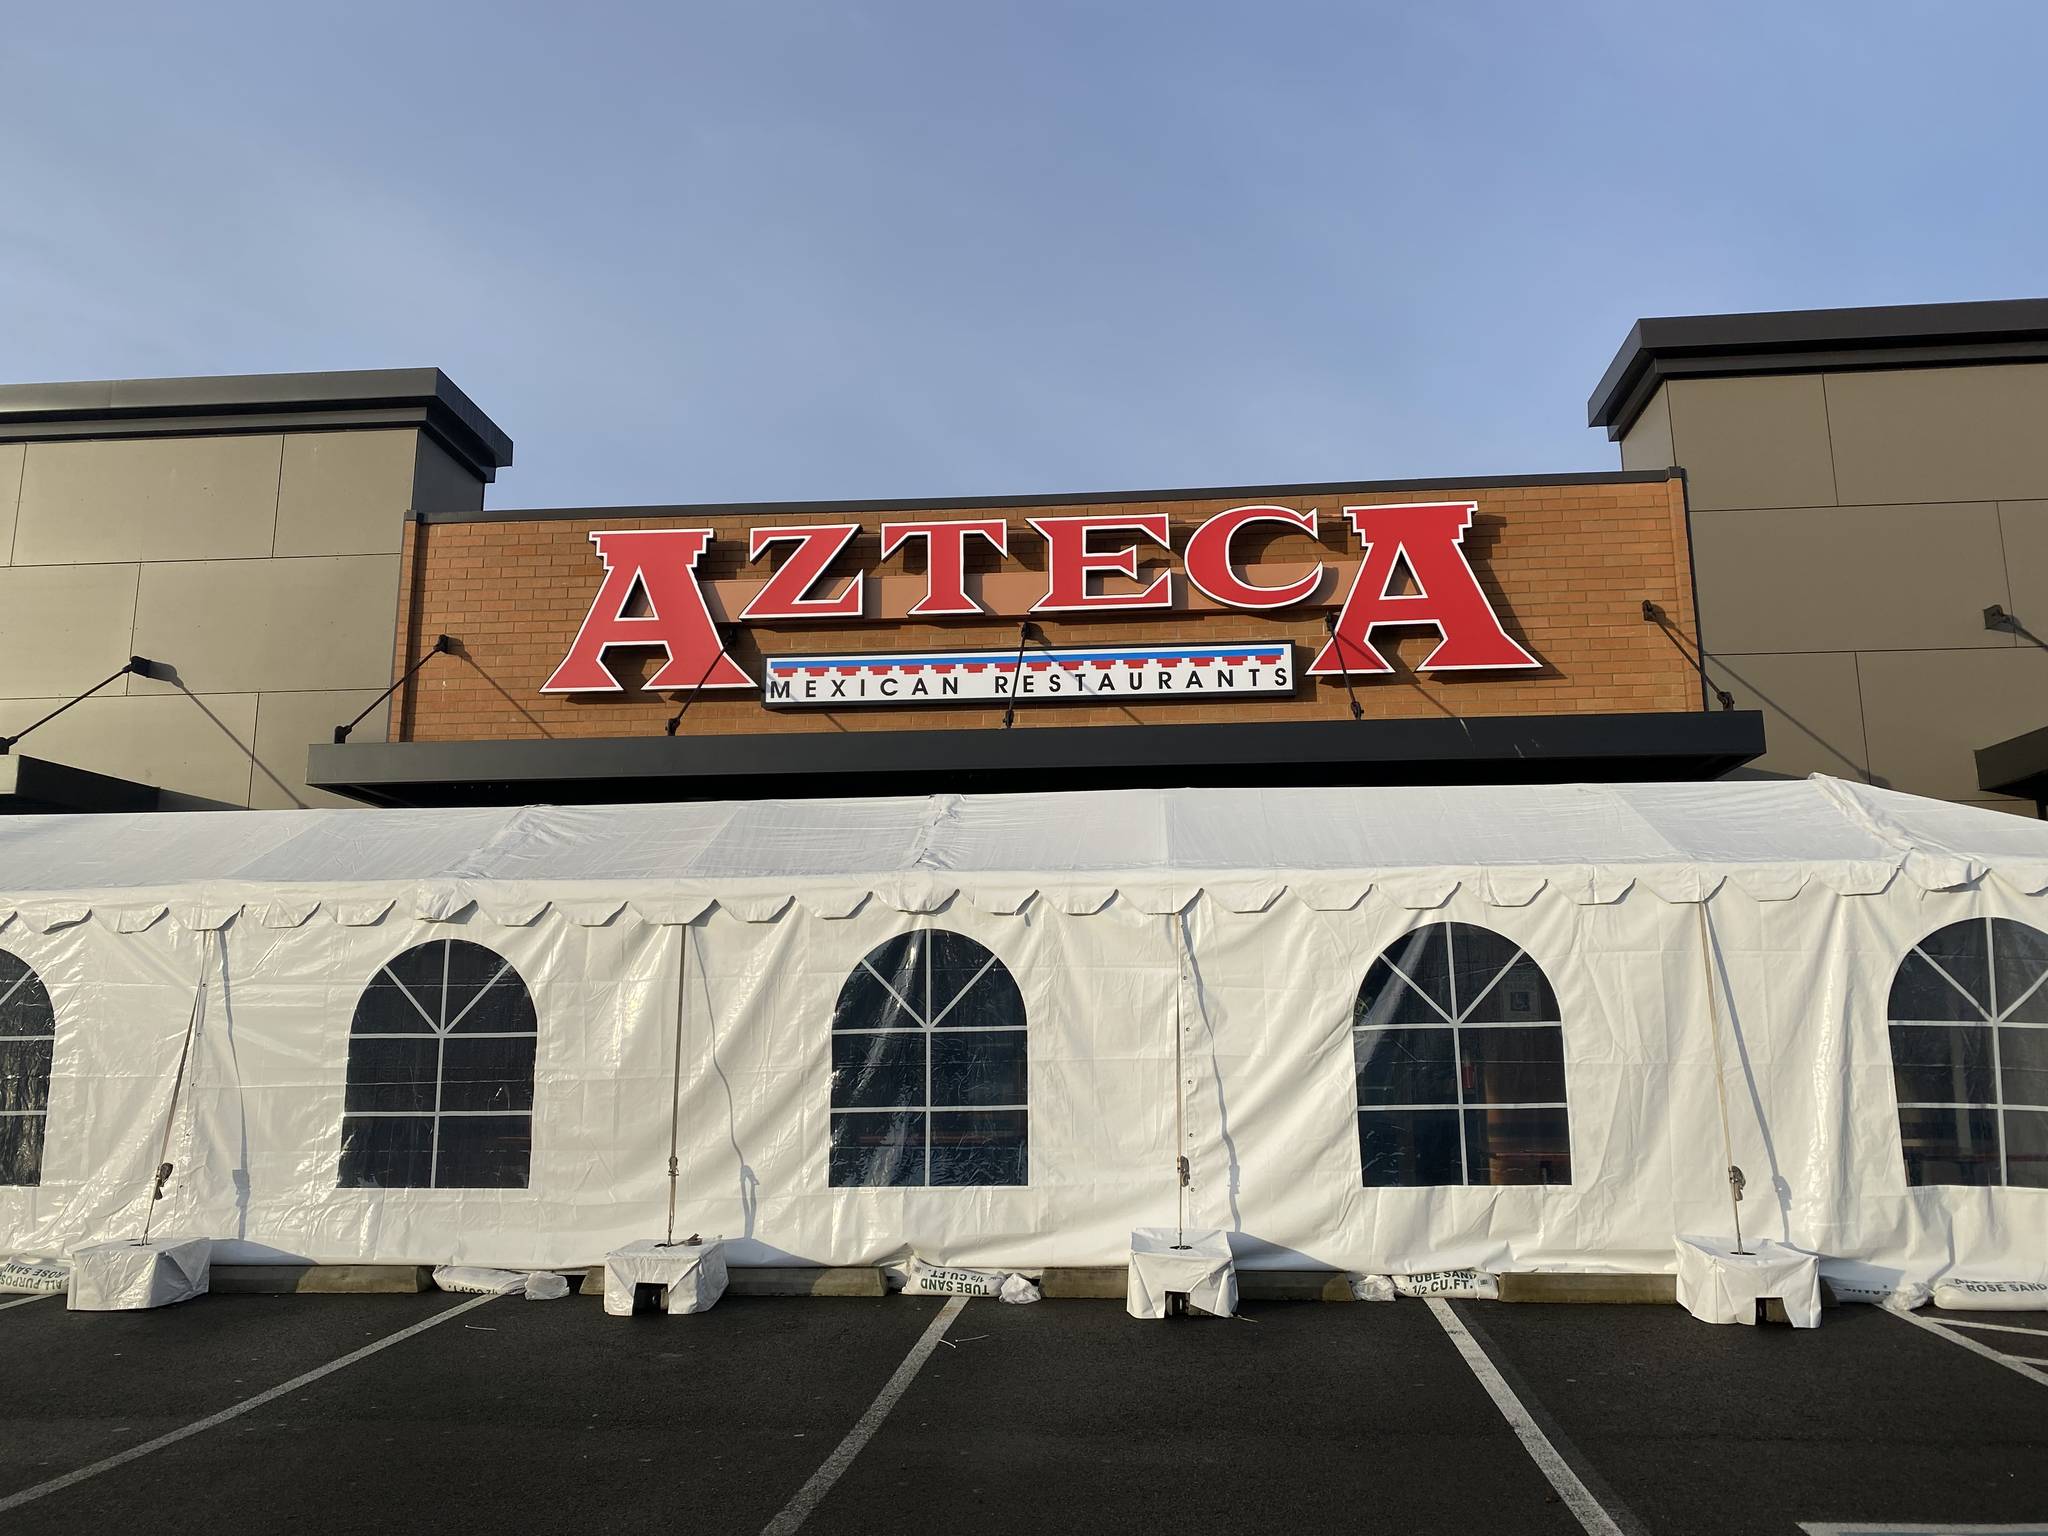 Azteca Mexican Restaurant is now open for business at 2020 S. 320th St., Suite L, Federal Way. Olivia Sullivan/the Mirror